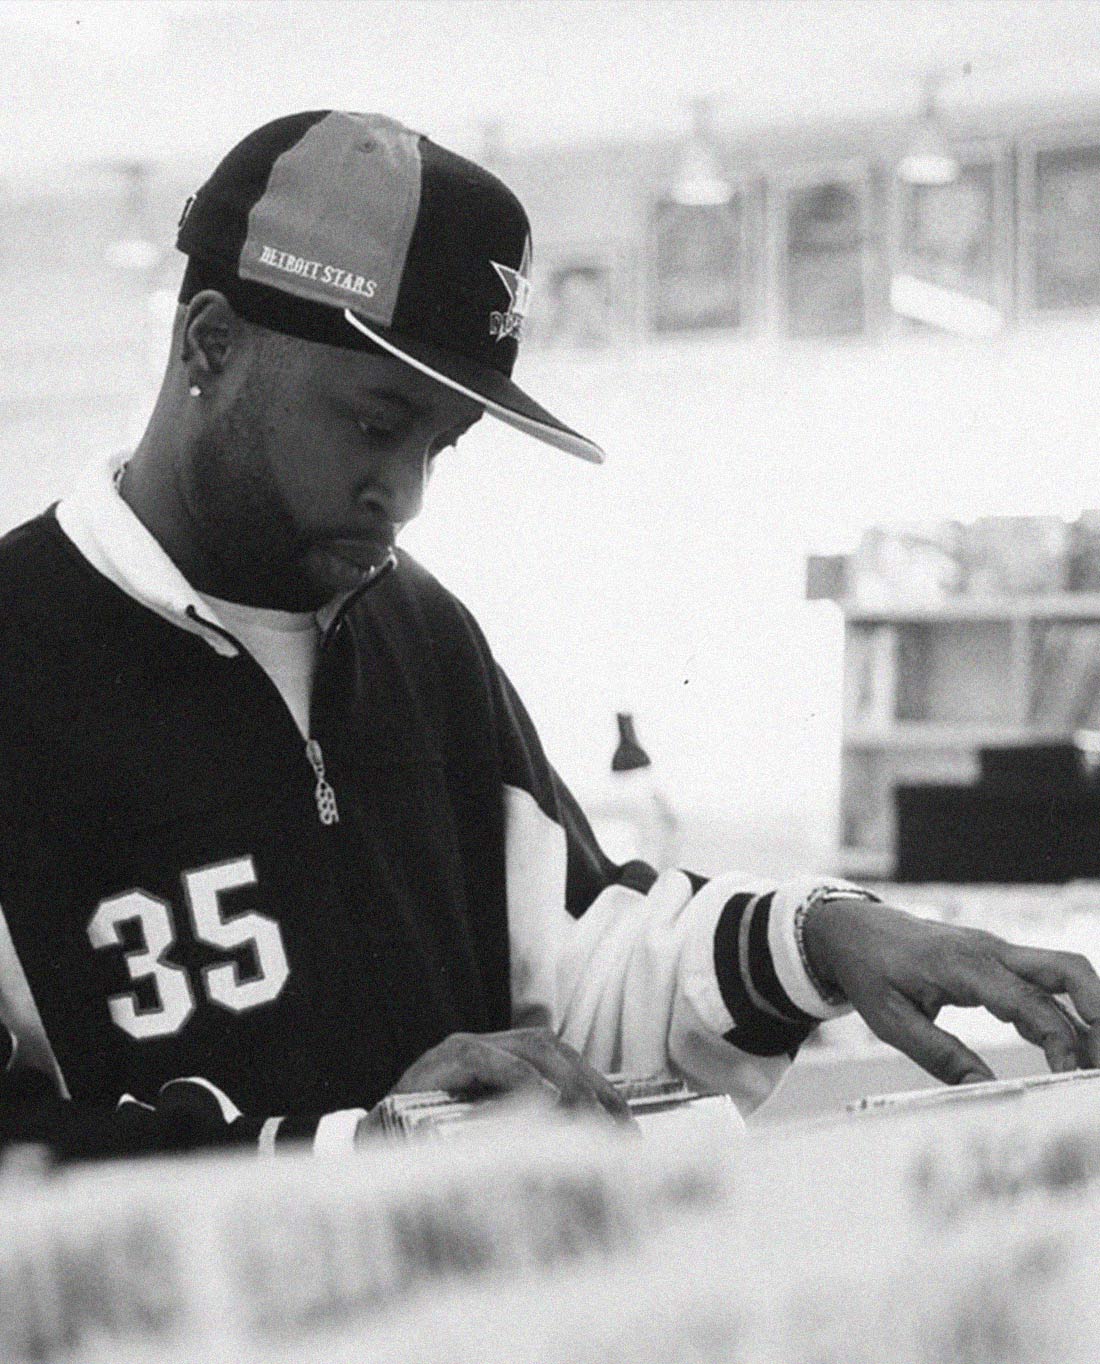 The 10 Most Wanted J Dilla Merchandise Items and Collectibles